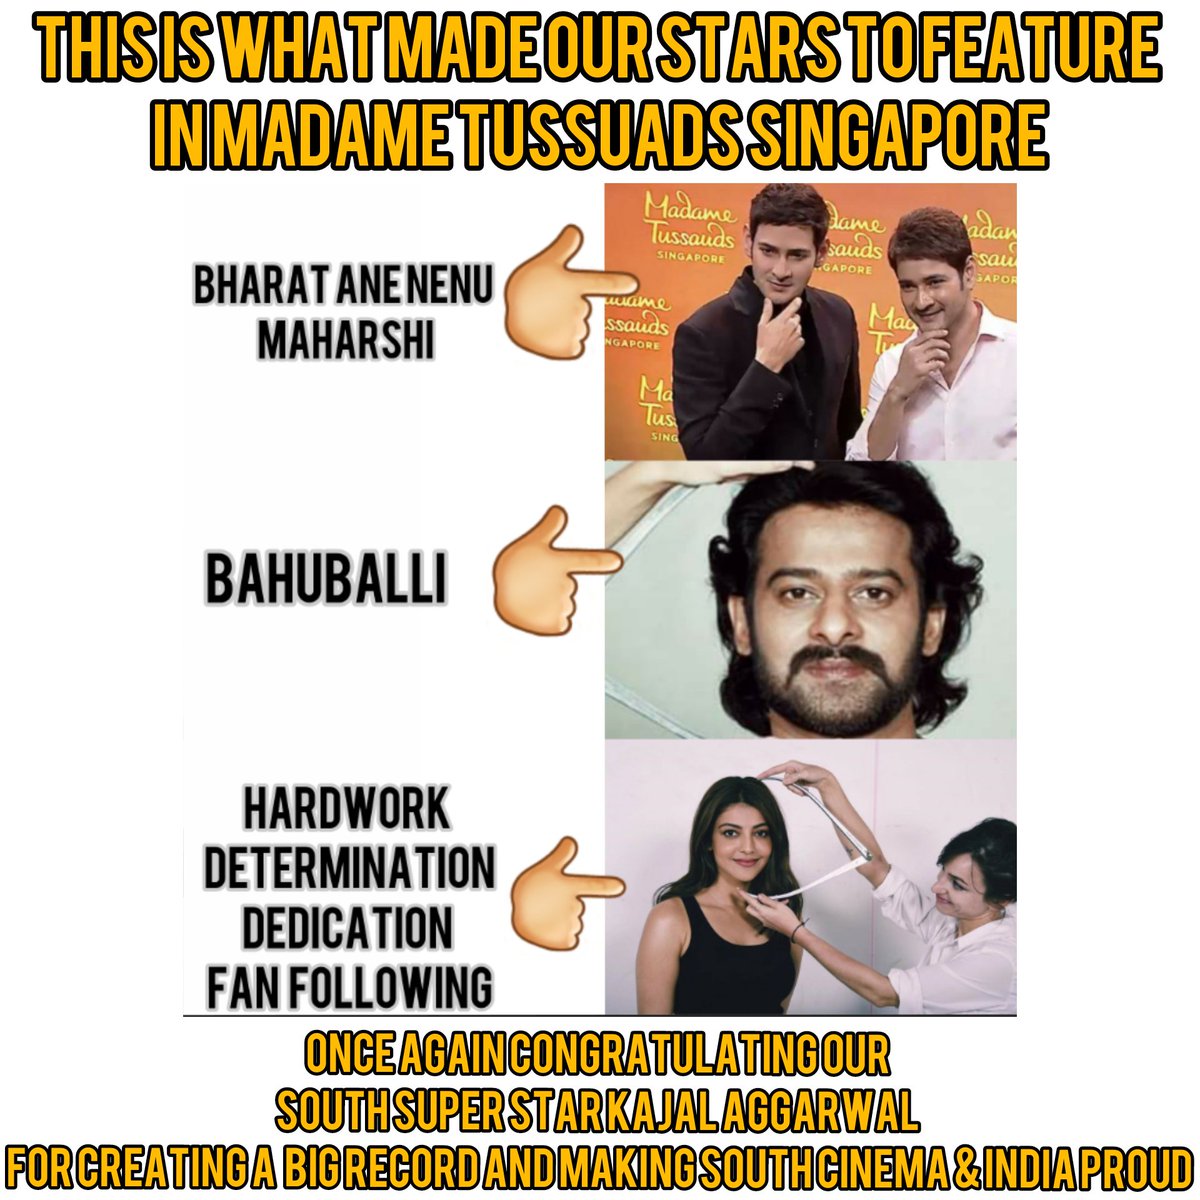 This is what made our south stars to feature in #MadametussaudsSingapore 😍😍 super proud of you @MsKajalAggarwal ma'am 😍🤗👏👌🙏 more power 💪👊

#SouthSuperStarKajalAggarwal